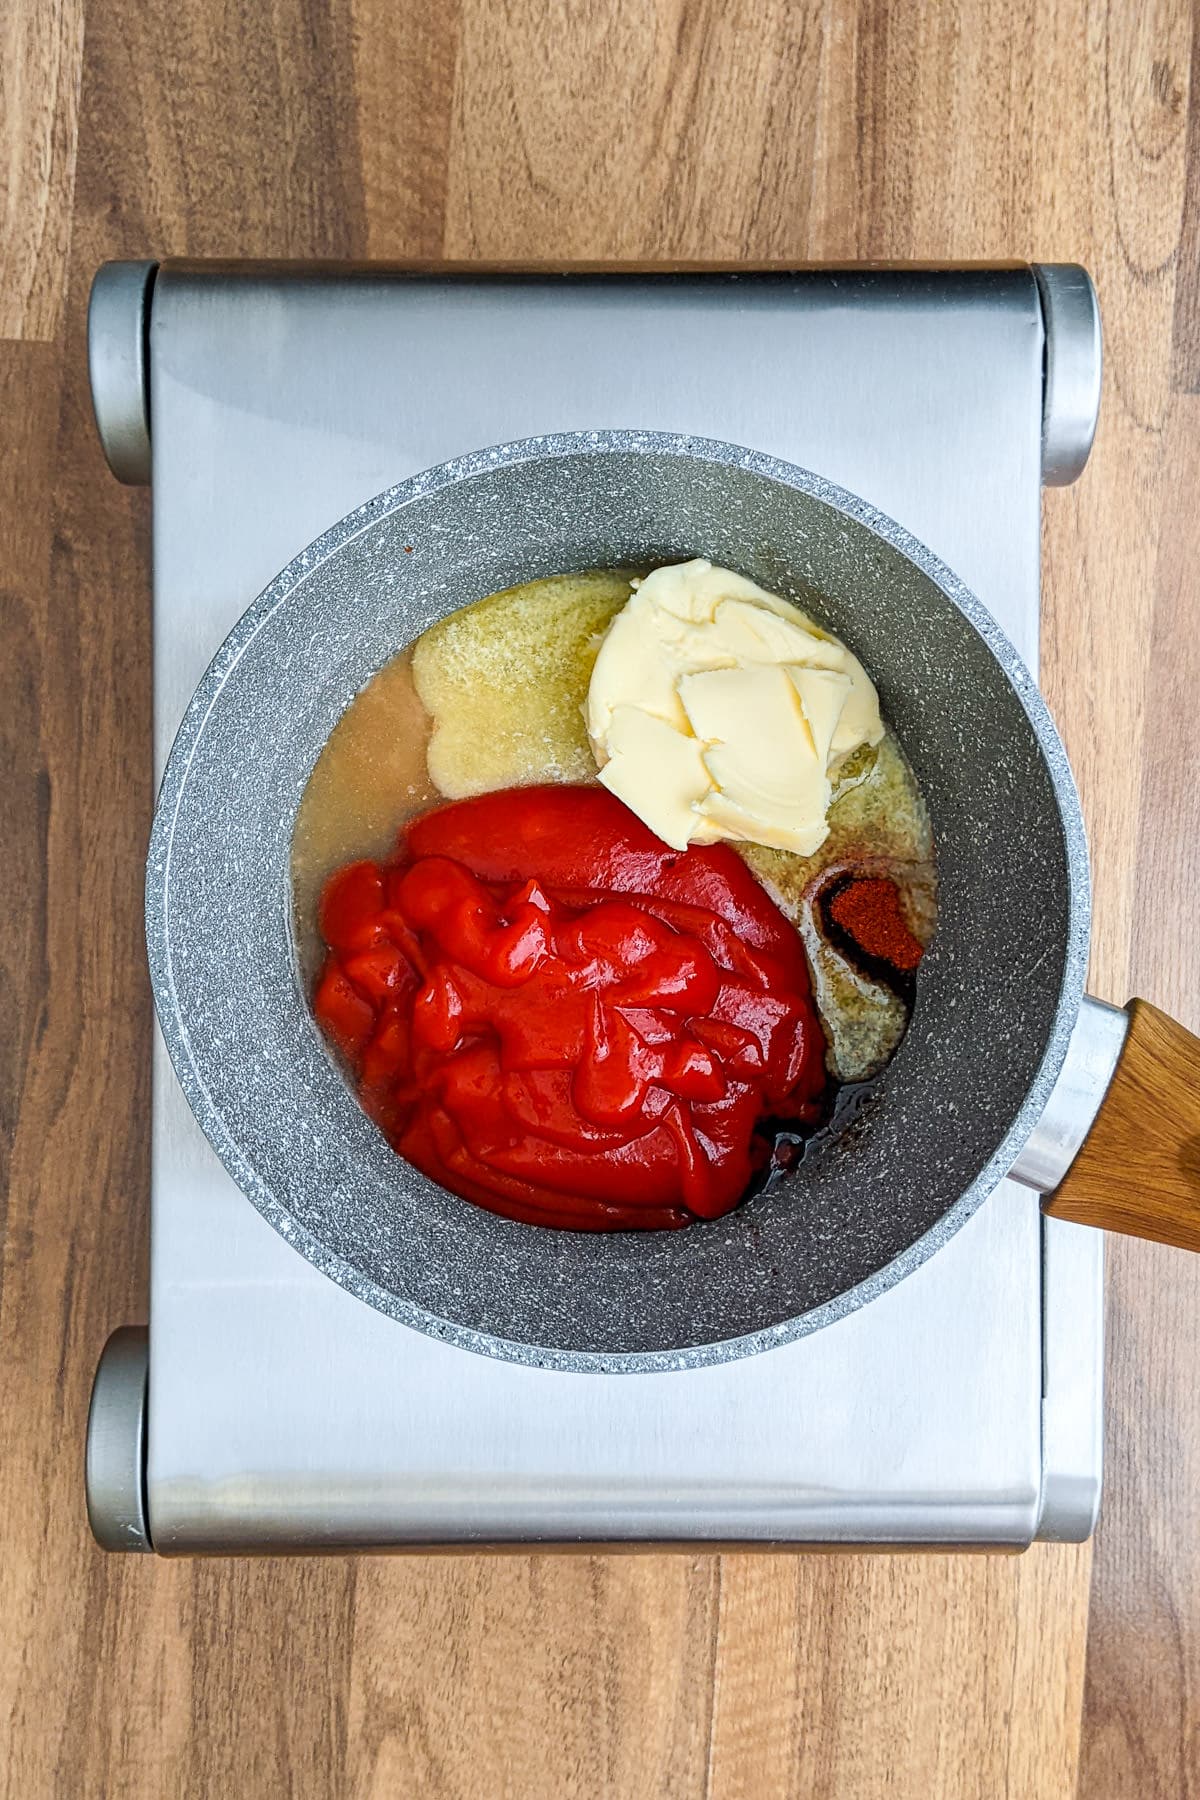 Sauce pan with chili sauce, melted butter and paprika.